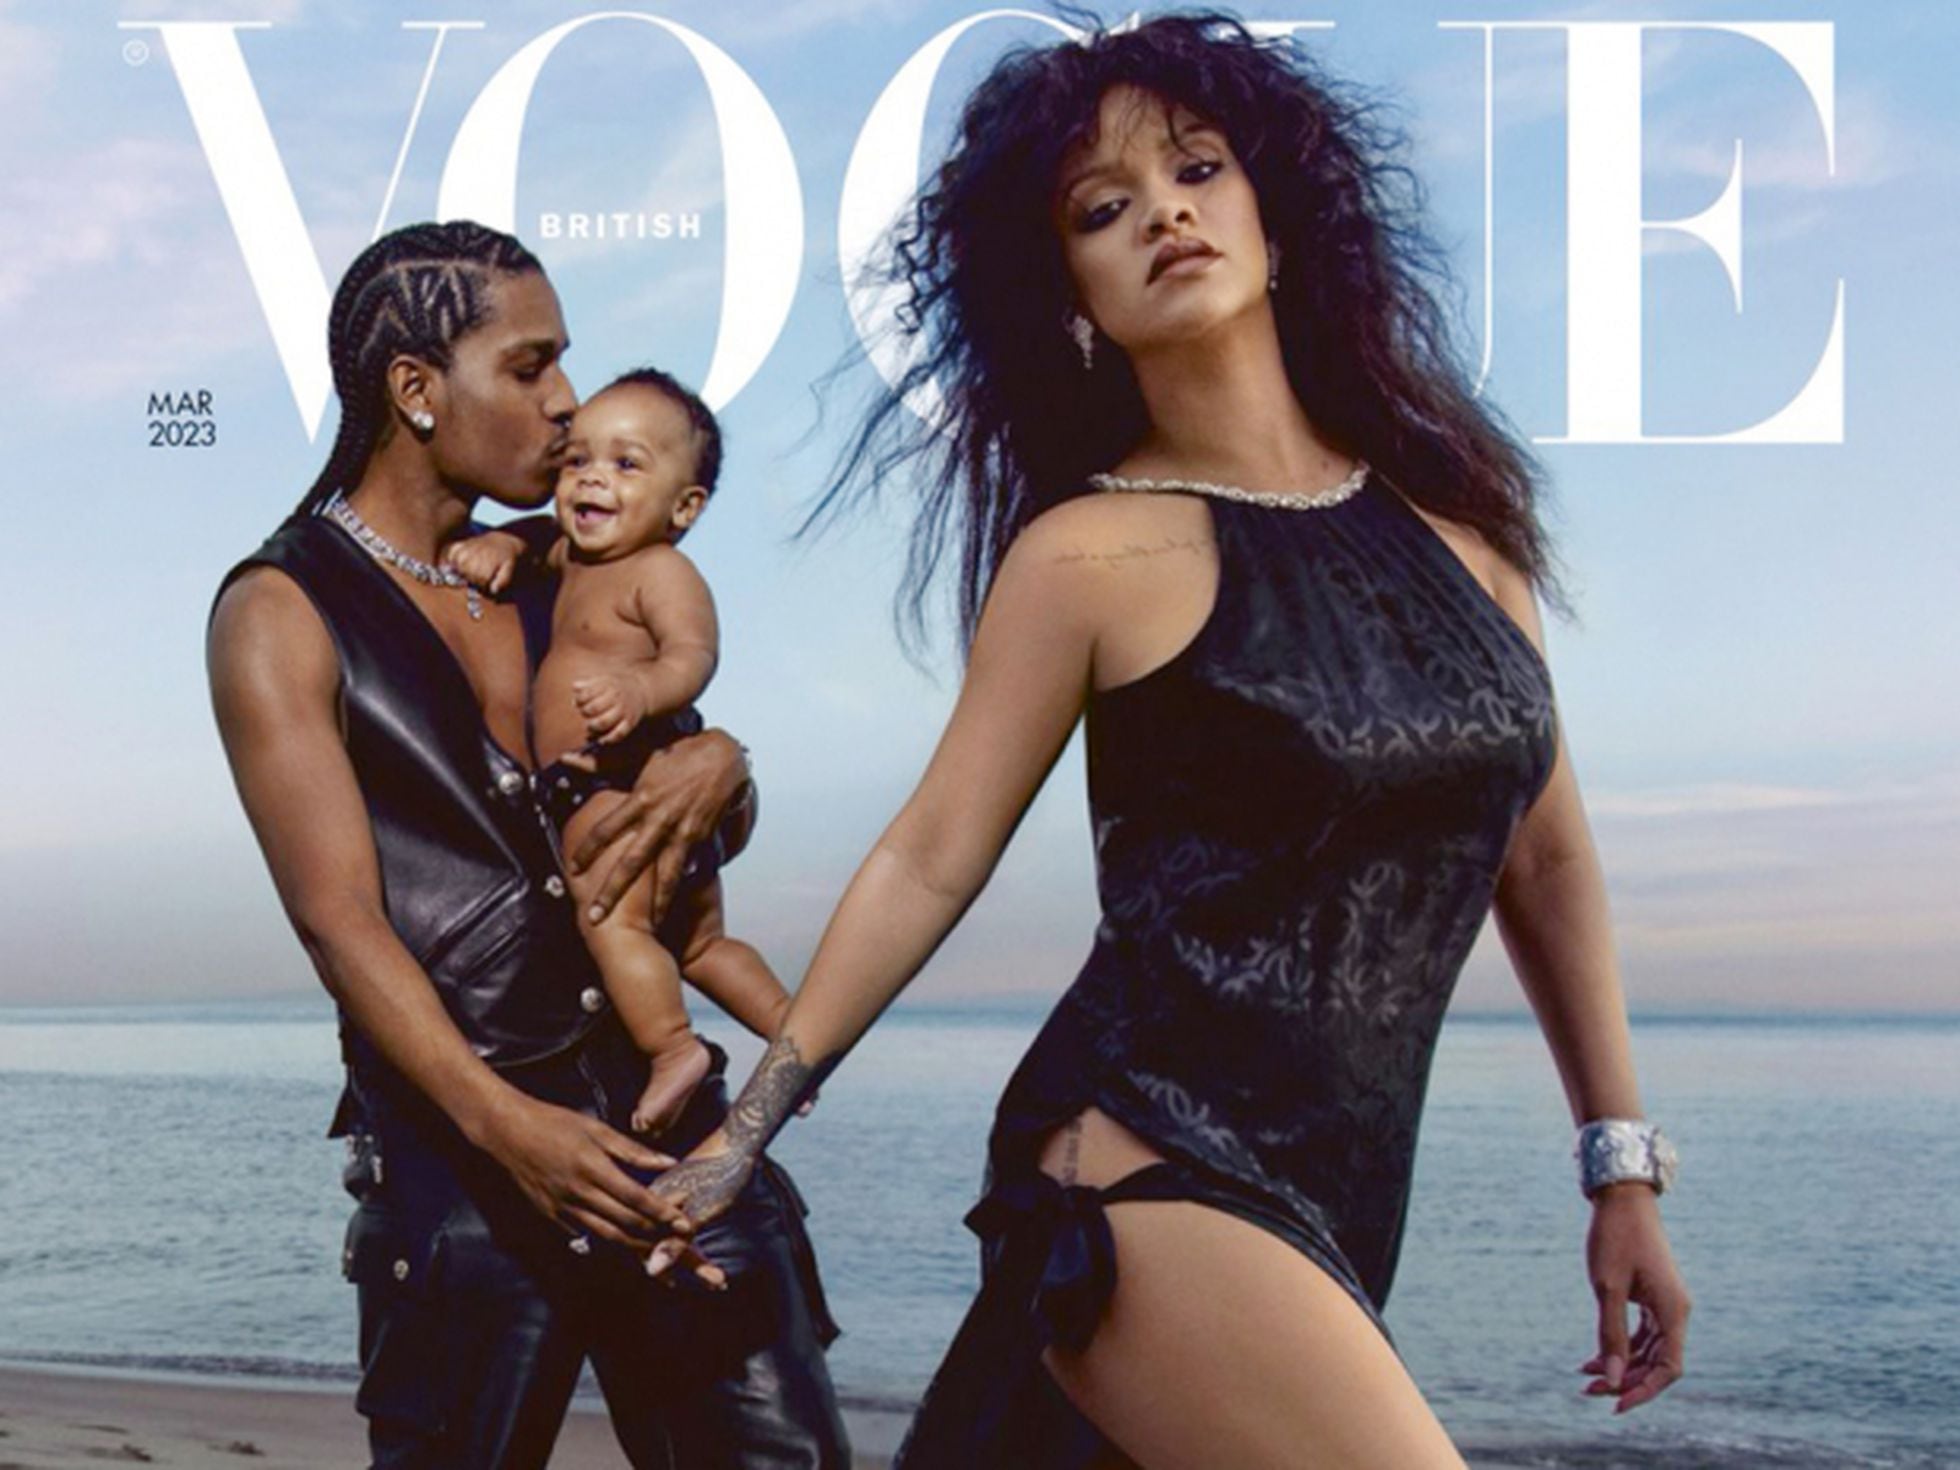 Rihanna and A$AP Rocky pose with baby boy for 'Vogue' cover | Culture | EL  PAÍS English